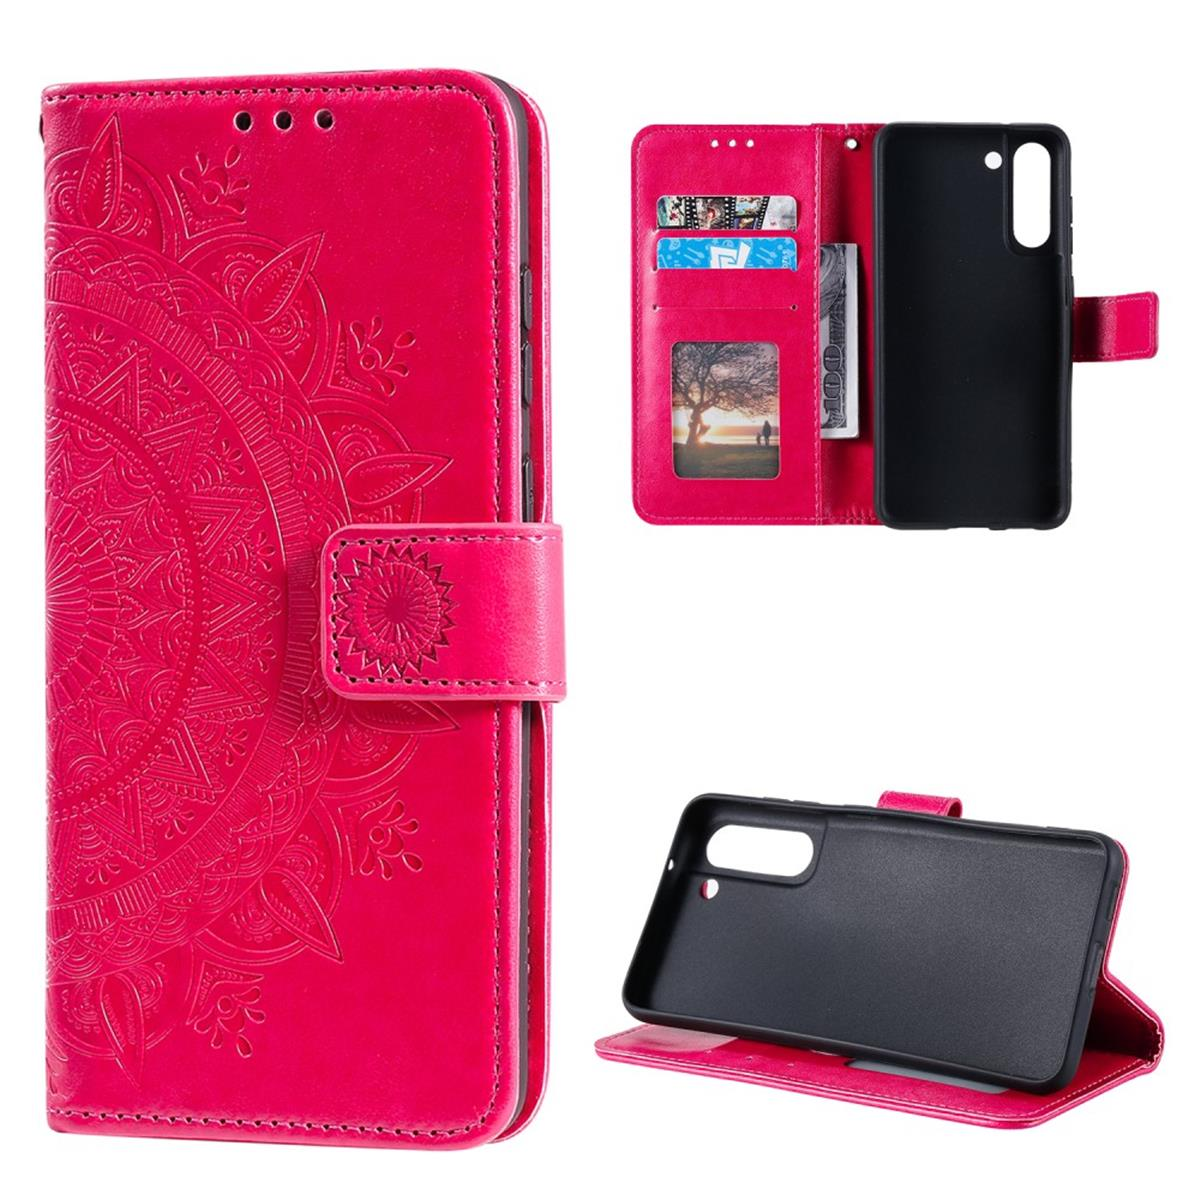 COVERKINGZ Klapphülle mit Mandala Muster, FE, Bookcover, S21 Samsung, Galaxy Pink